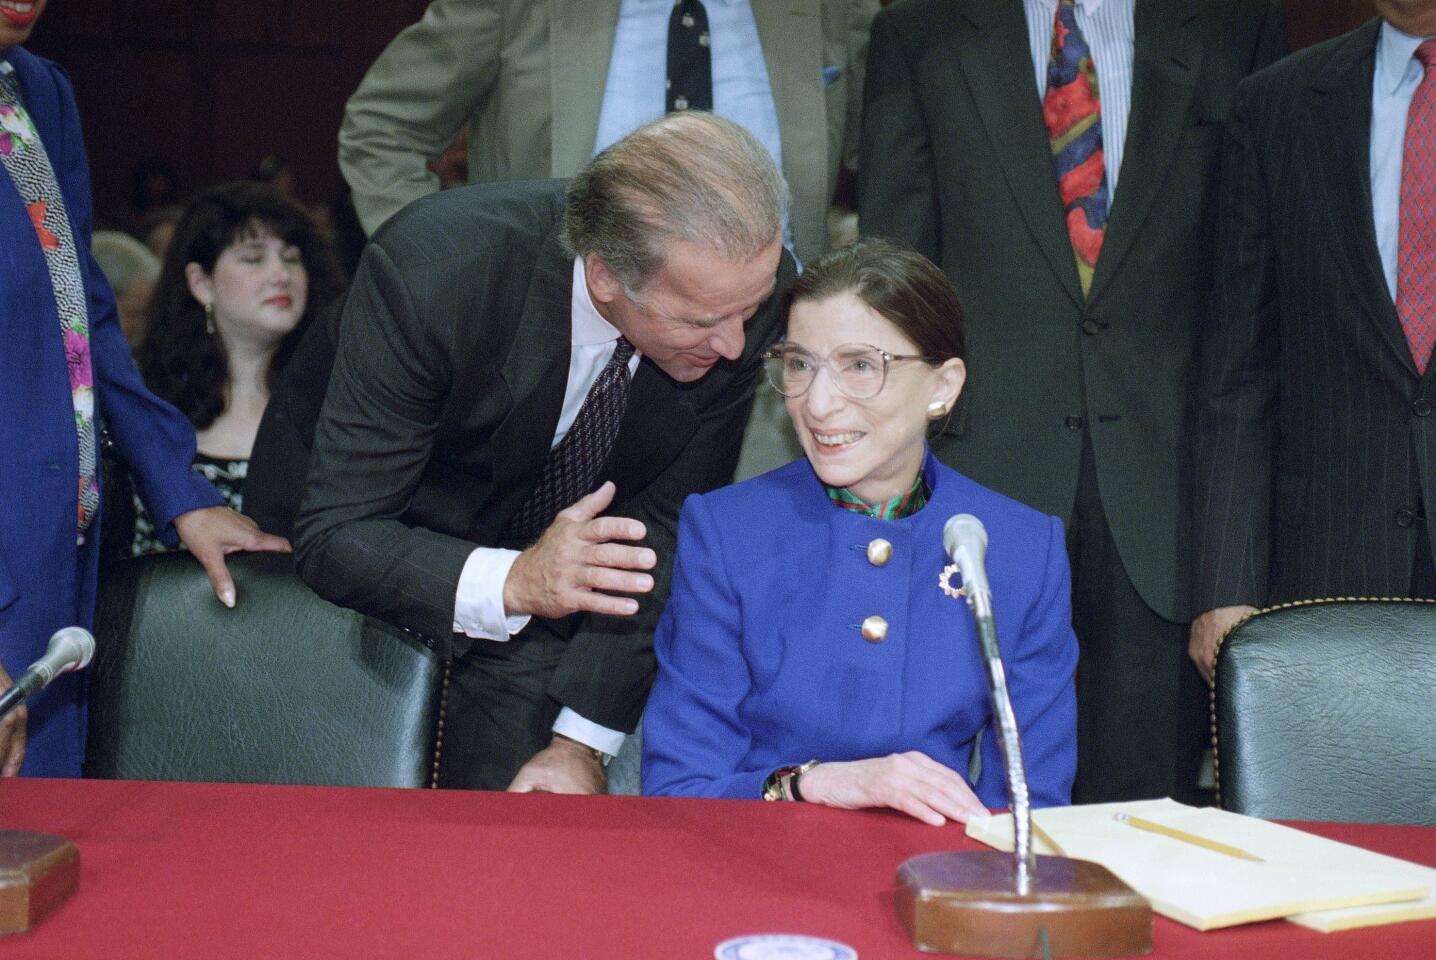 Joe Biden leans down to talk to Ruth Bader Ginsburg, seated in front of a microphone before her Senate confirmation hearing